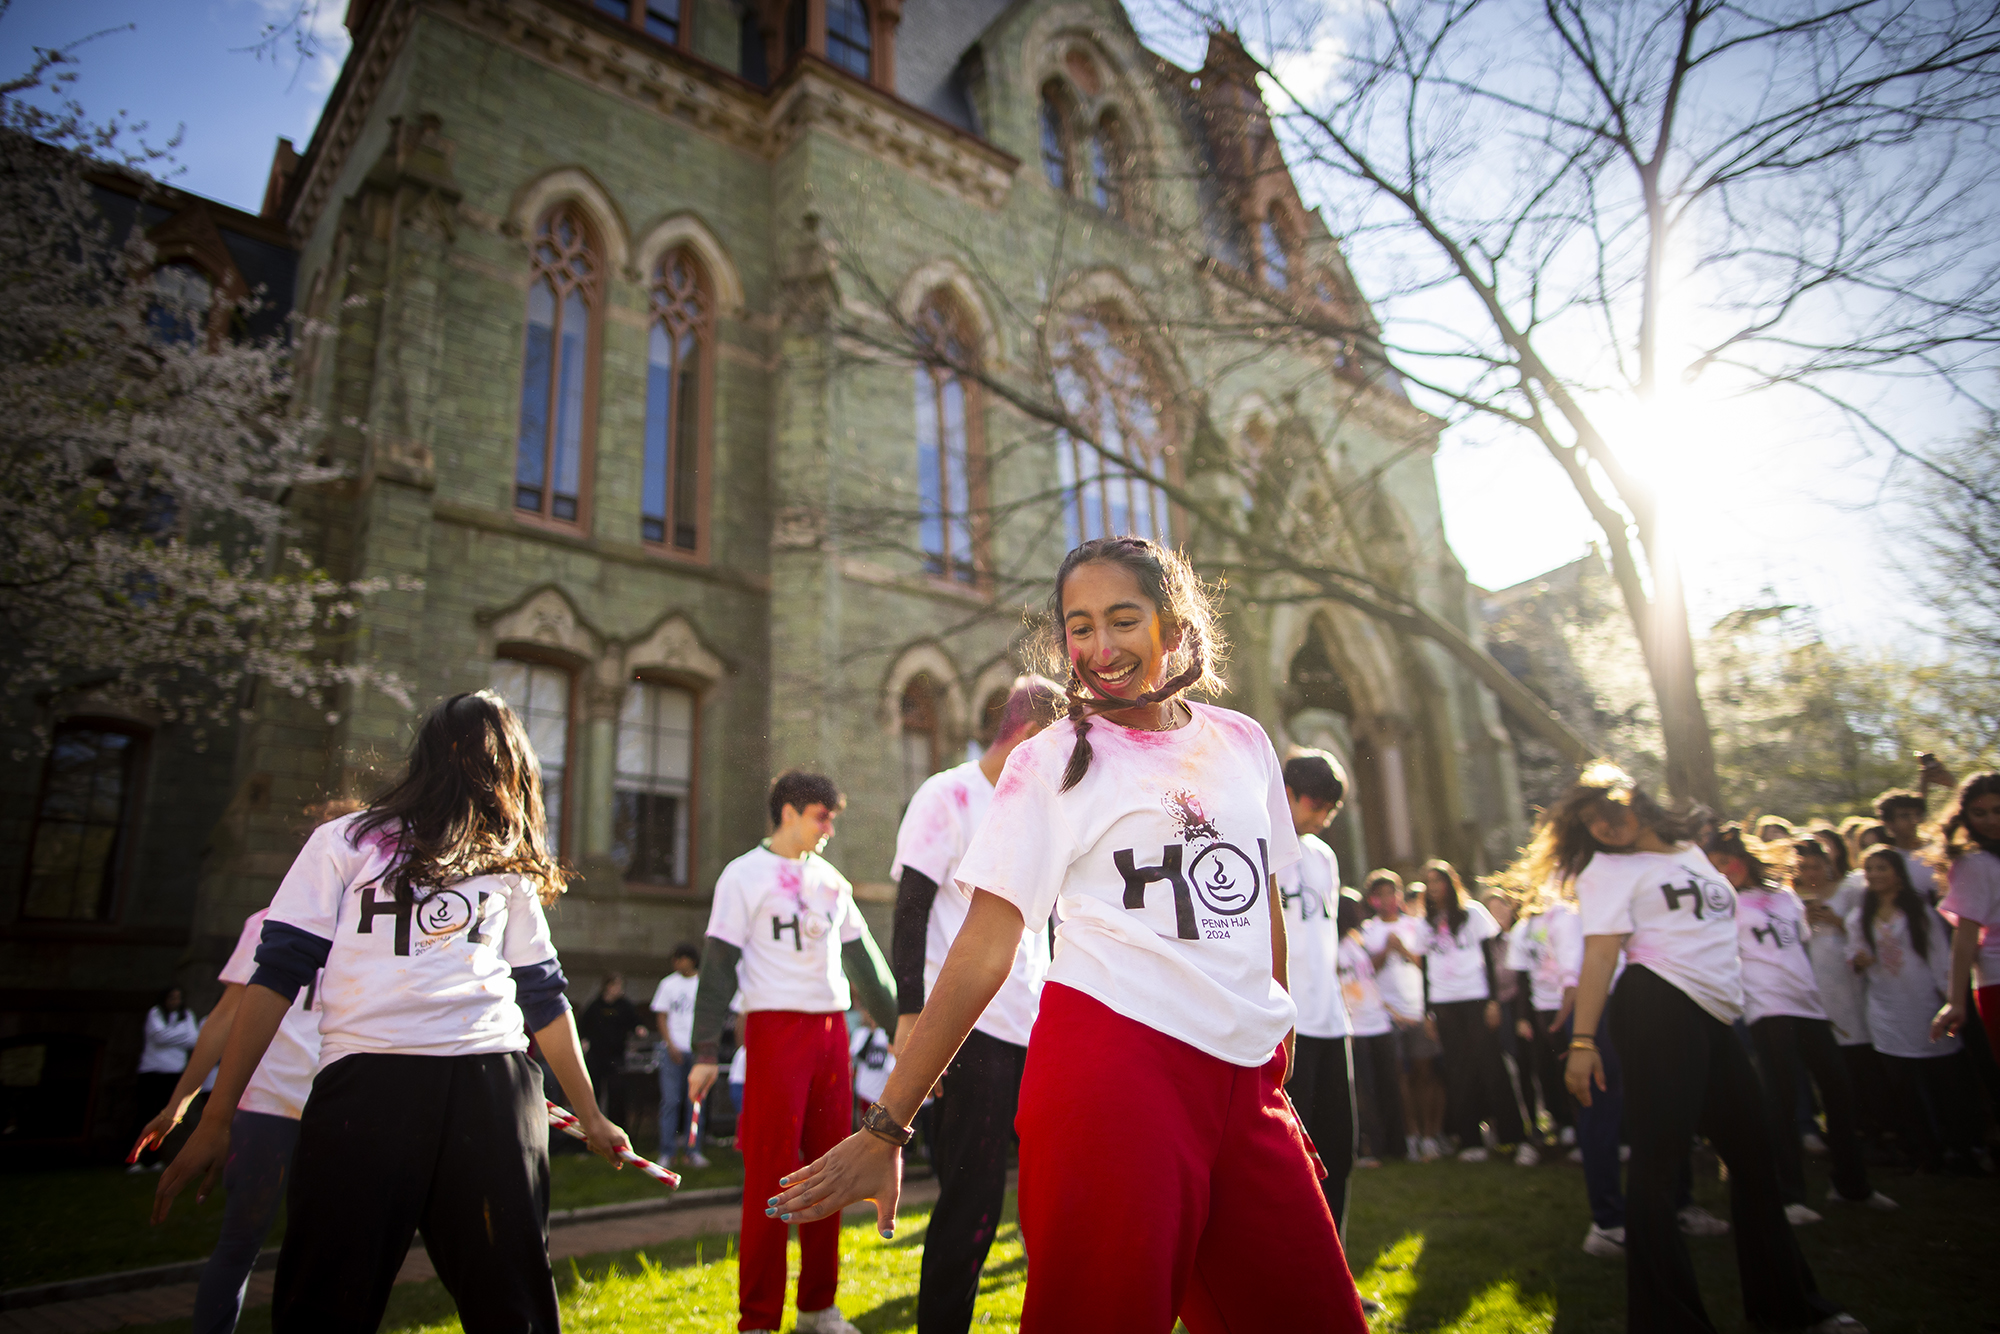 Penn dancers perform a dance for Holi in front of College Hall.